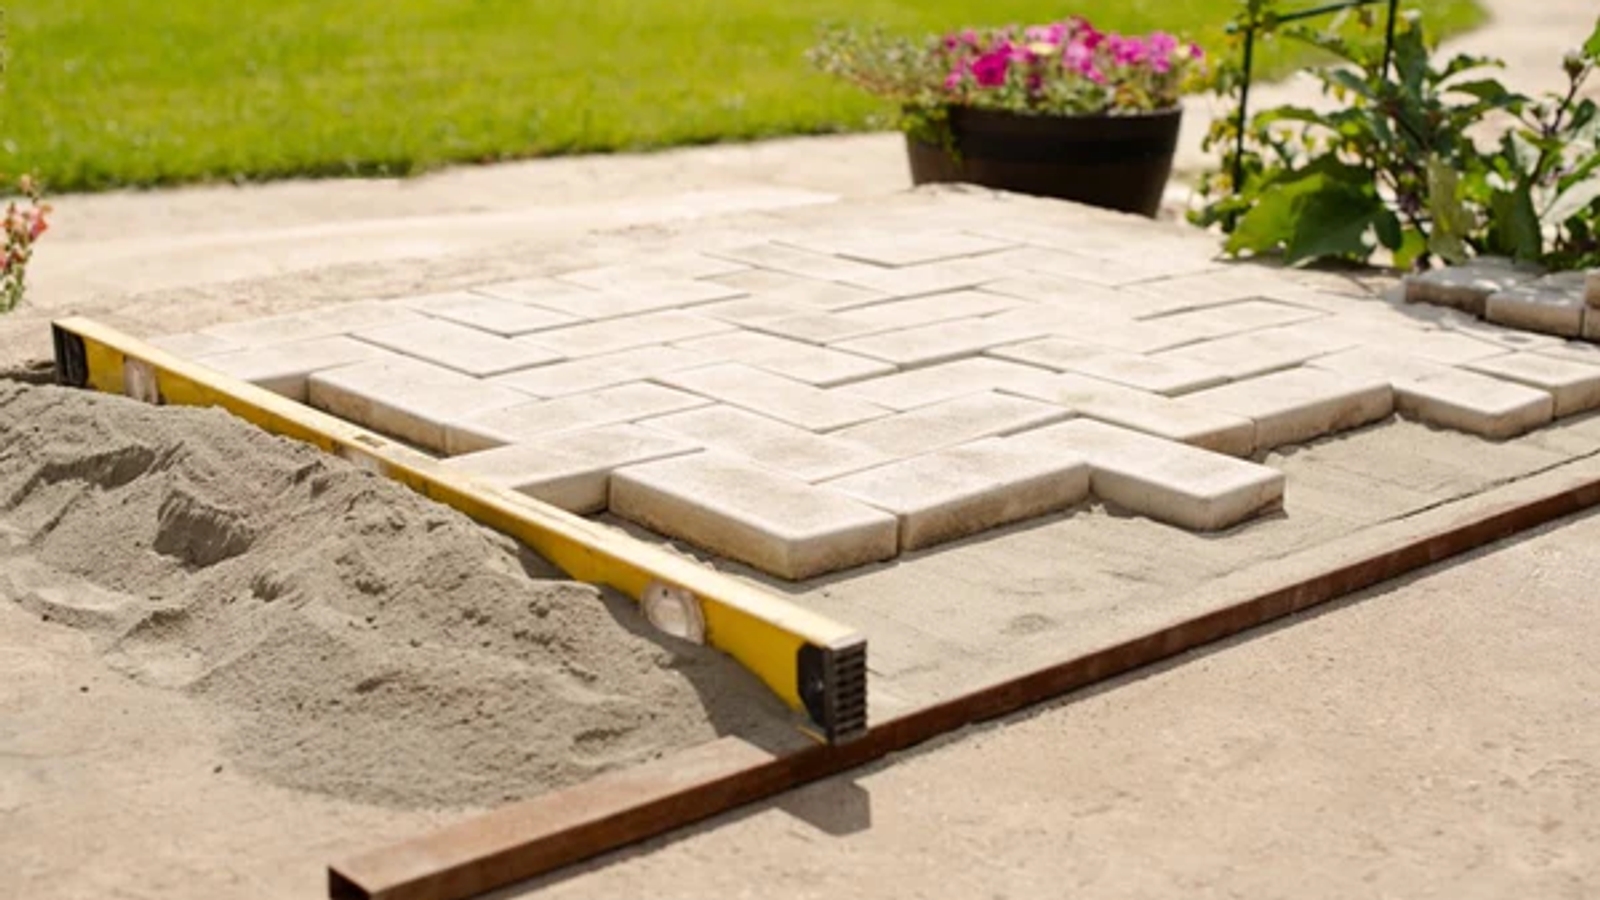 Paving slabs being laid in a garden